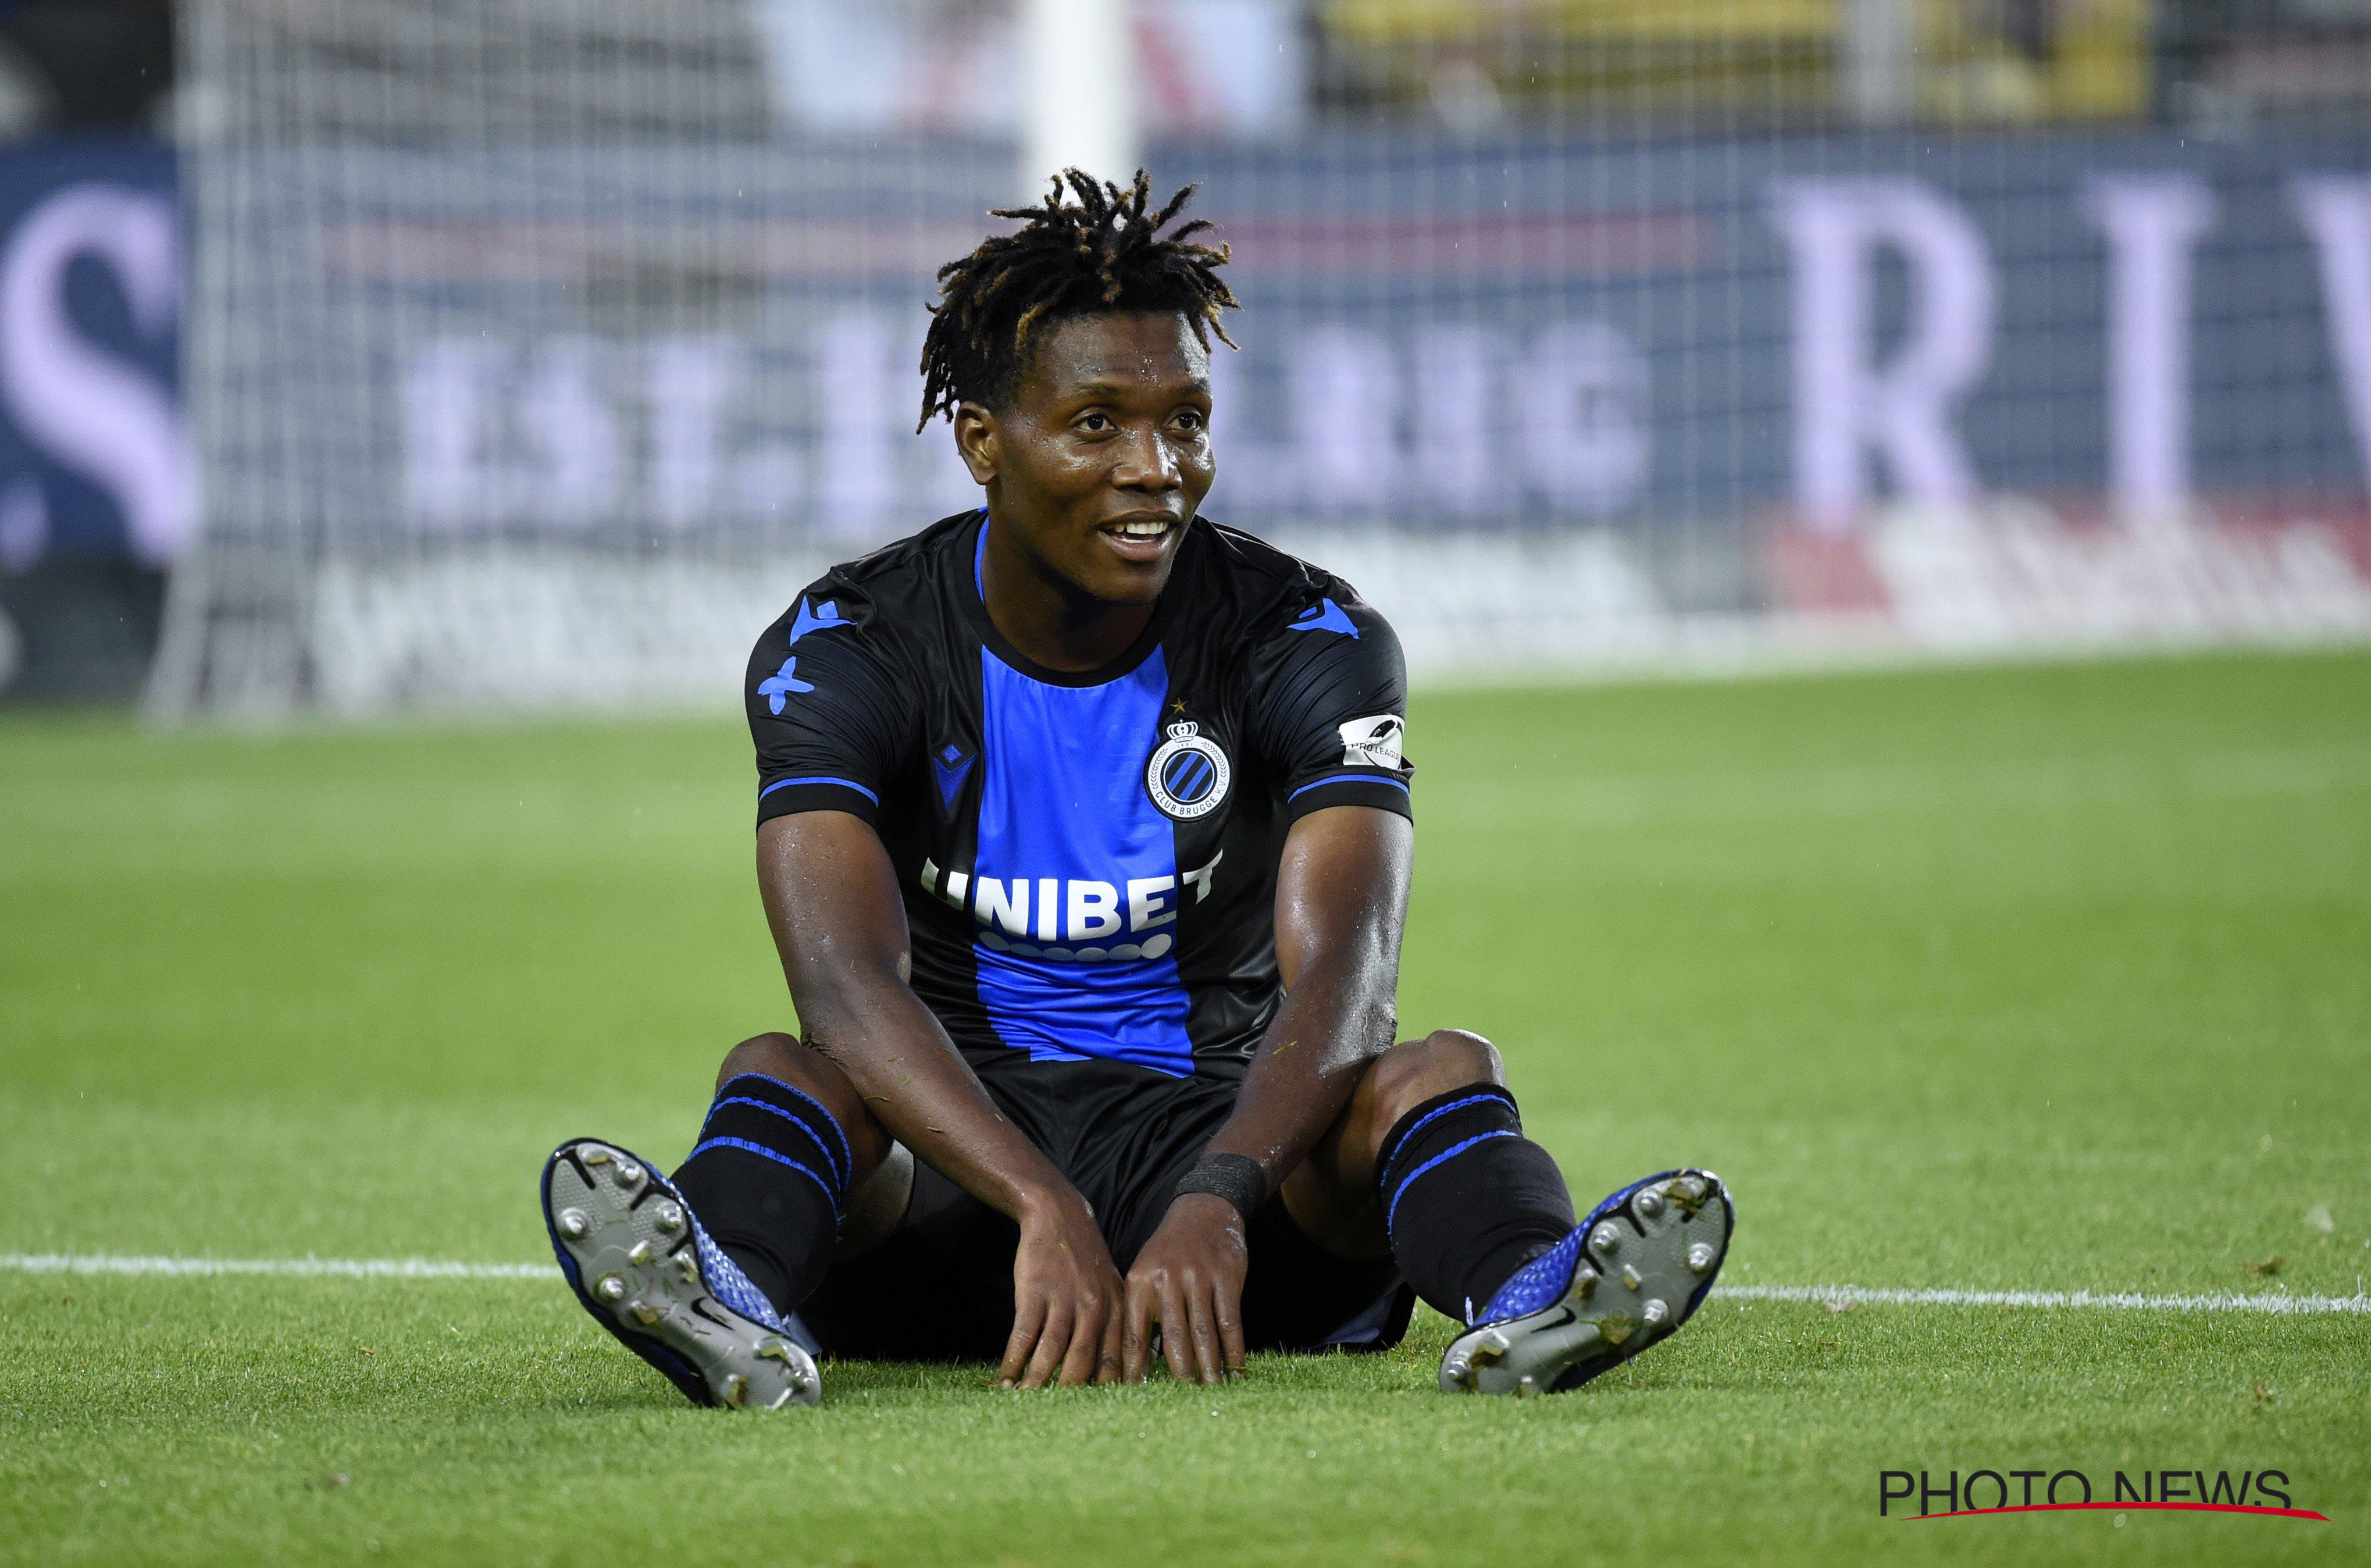 UCL Playoffs: Okereke  Stars In Brugge Away Win At LASK, Olayinka Also  Action For Slavia Prague